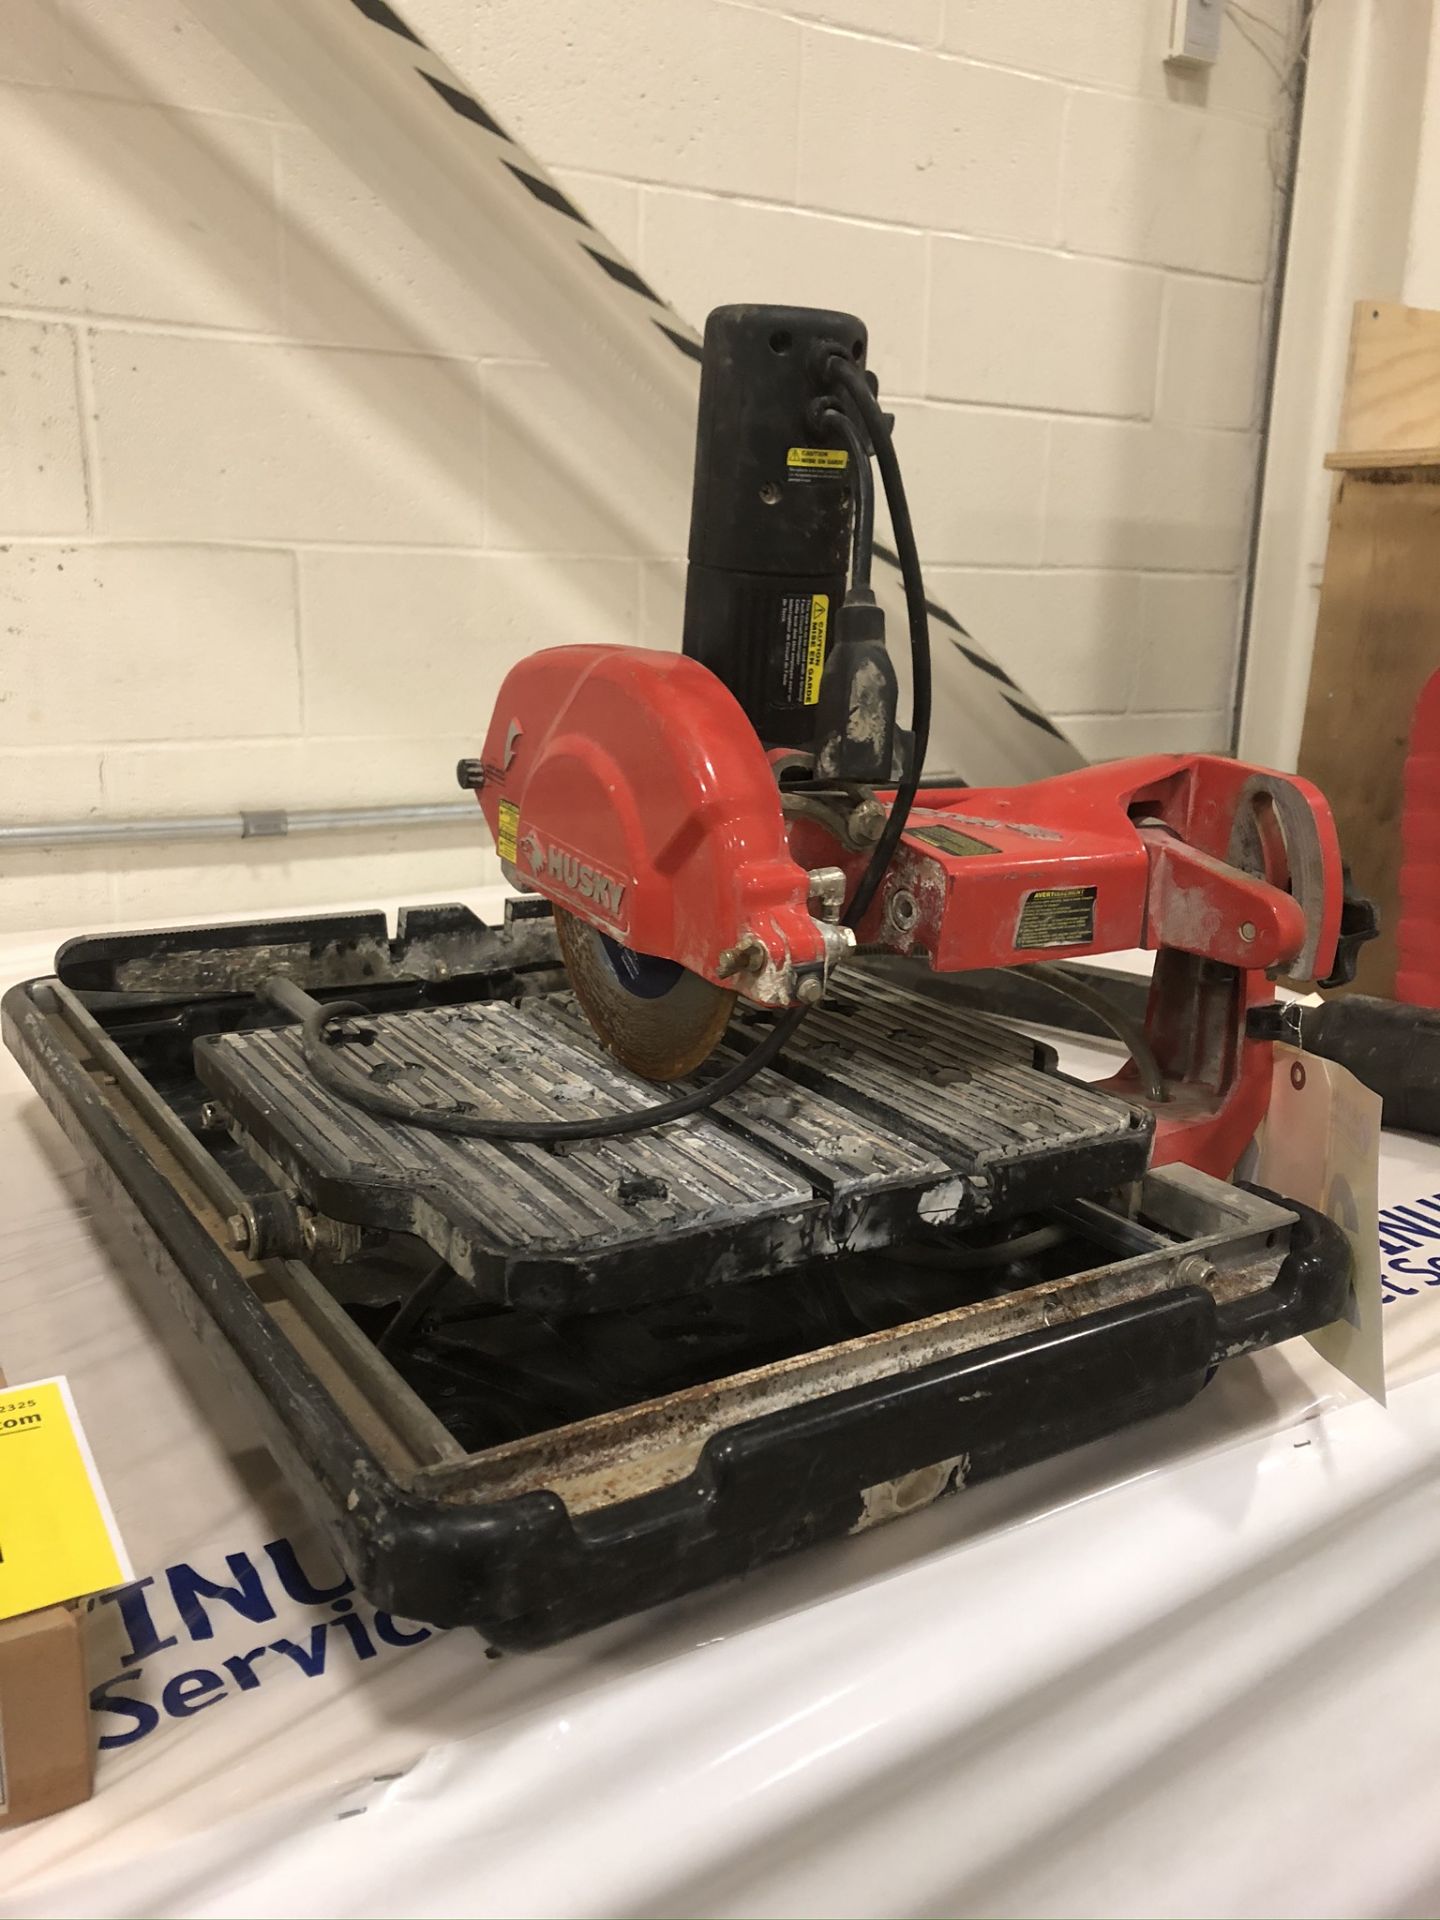 HUSKY, THD950LN, TILE SAW WITH TRAY, S/N J8042624 - Image 2 of 3